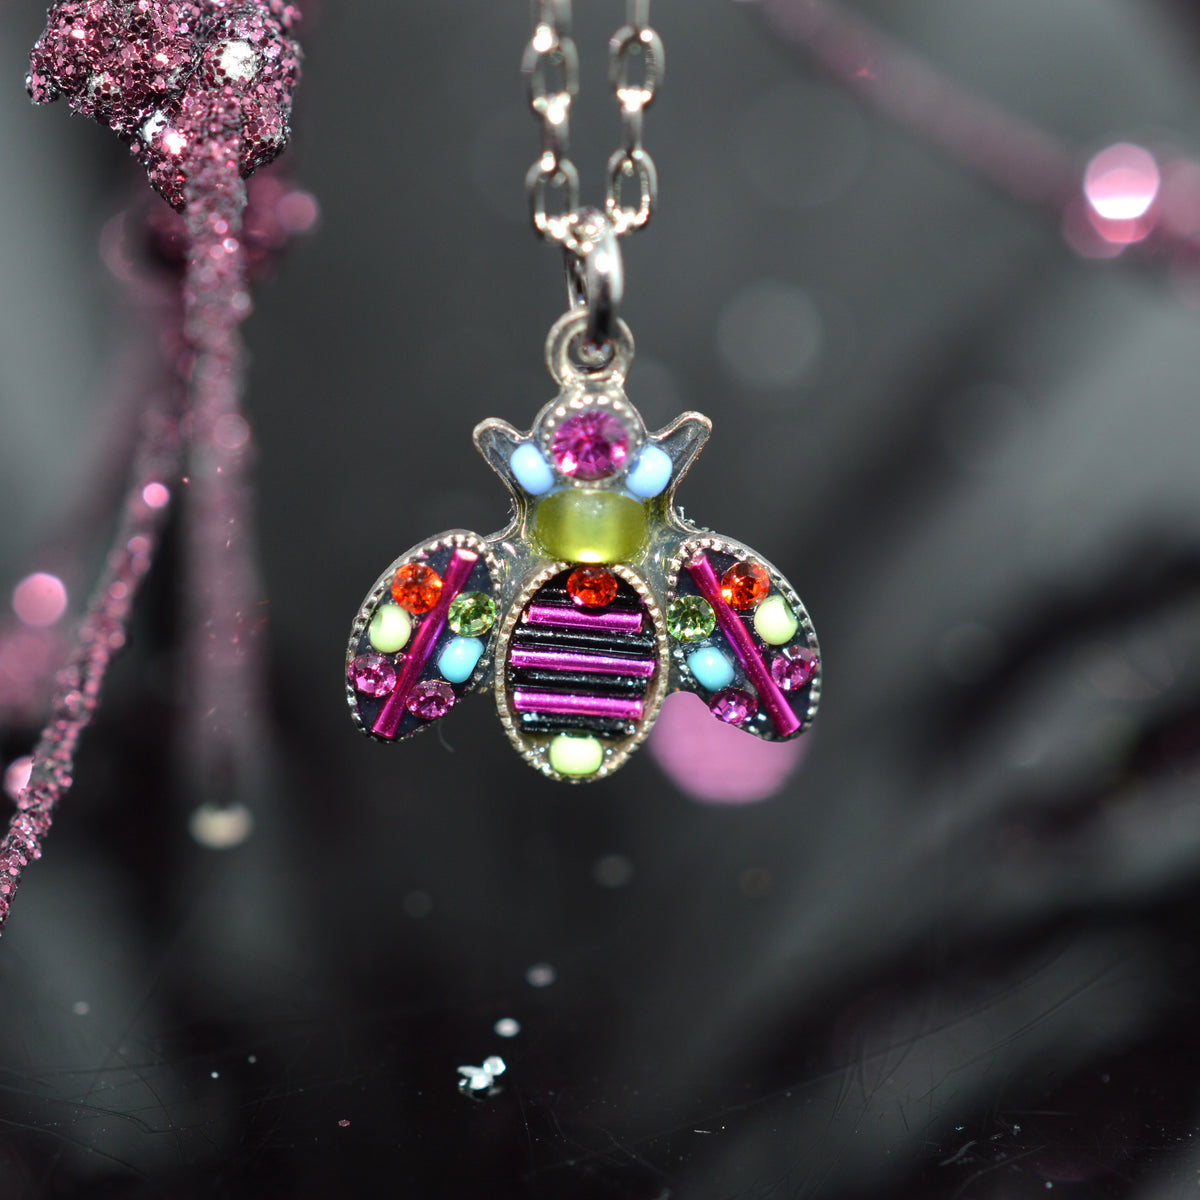 Antique Silver Plated Fuchsia Queen Bee Pendant by Firefly